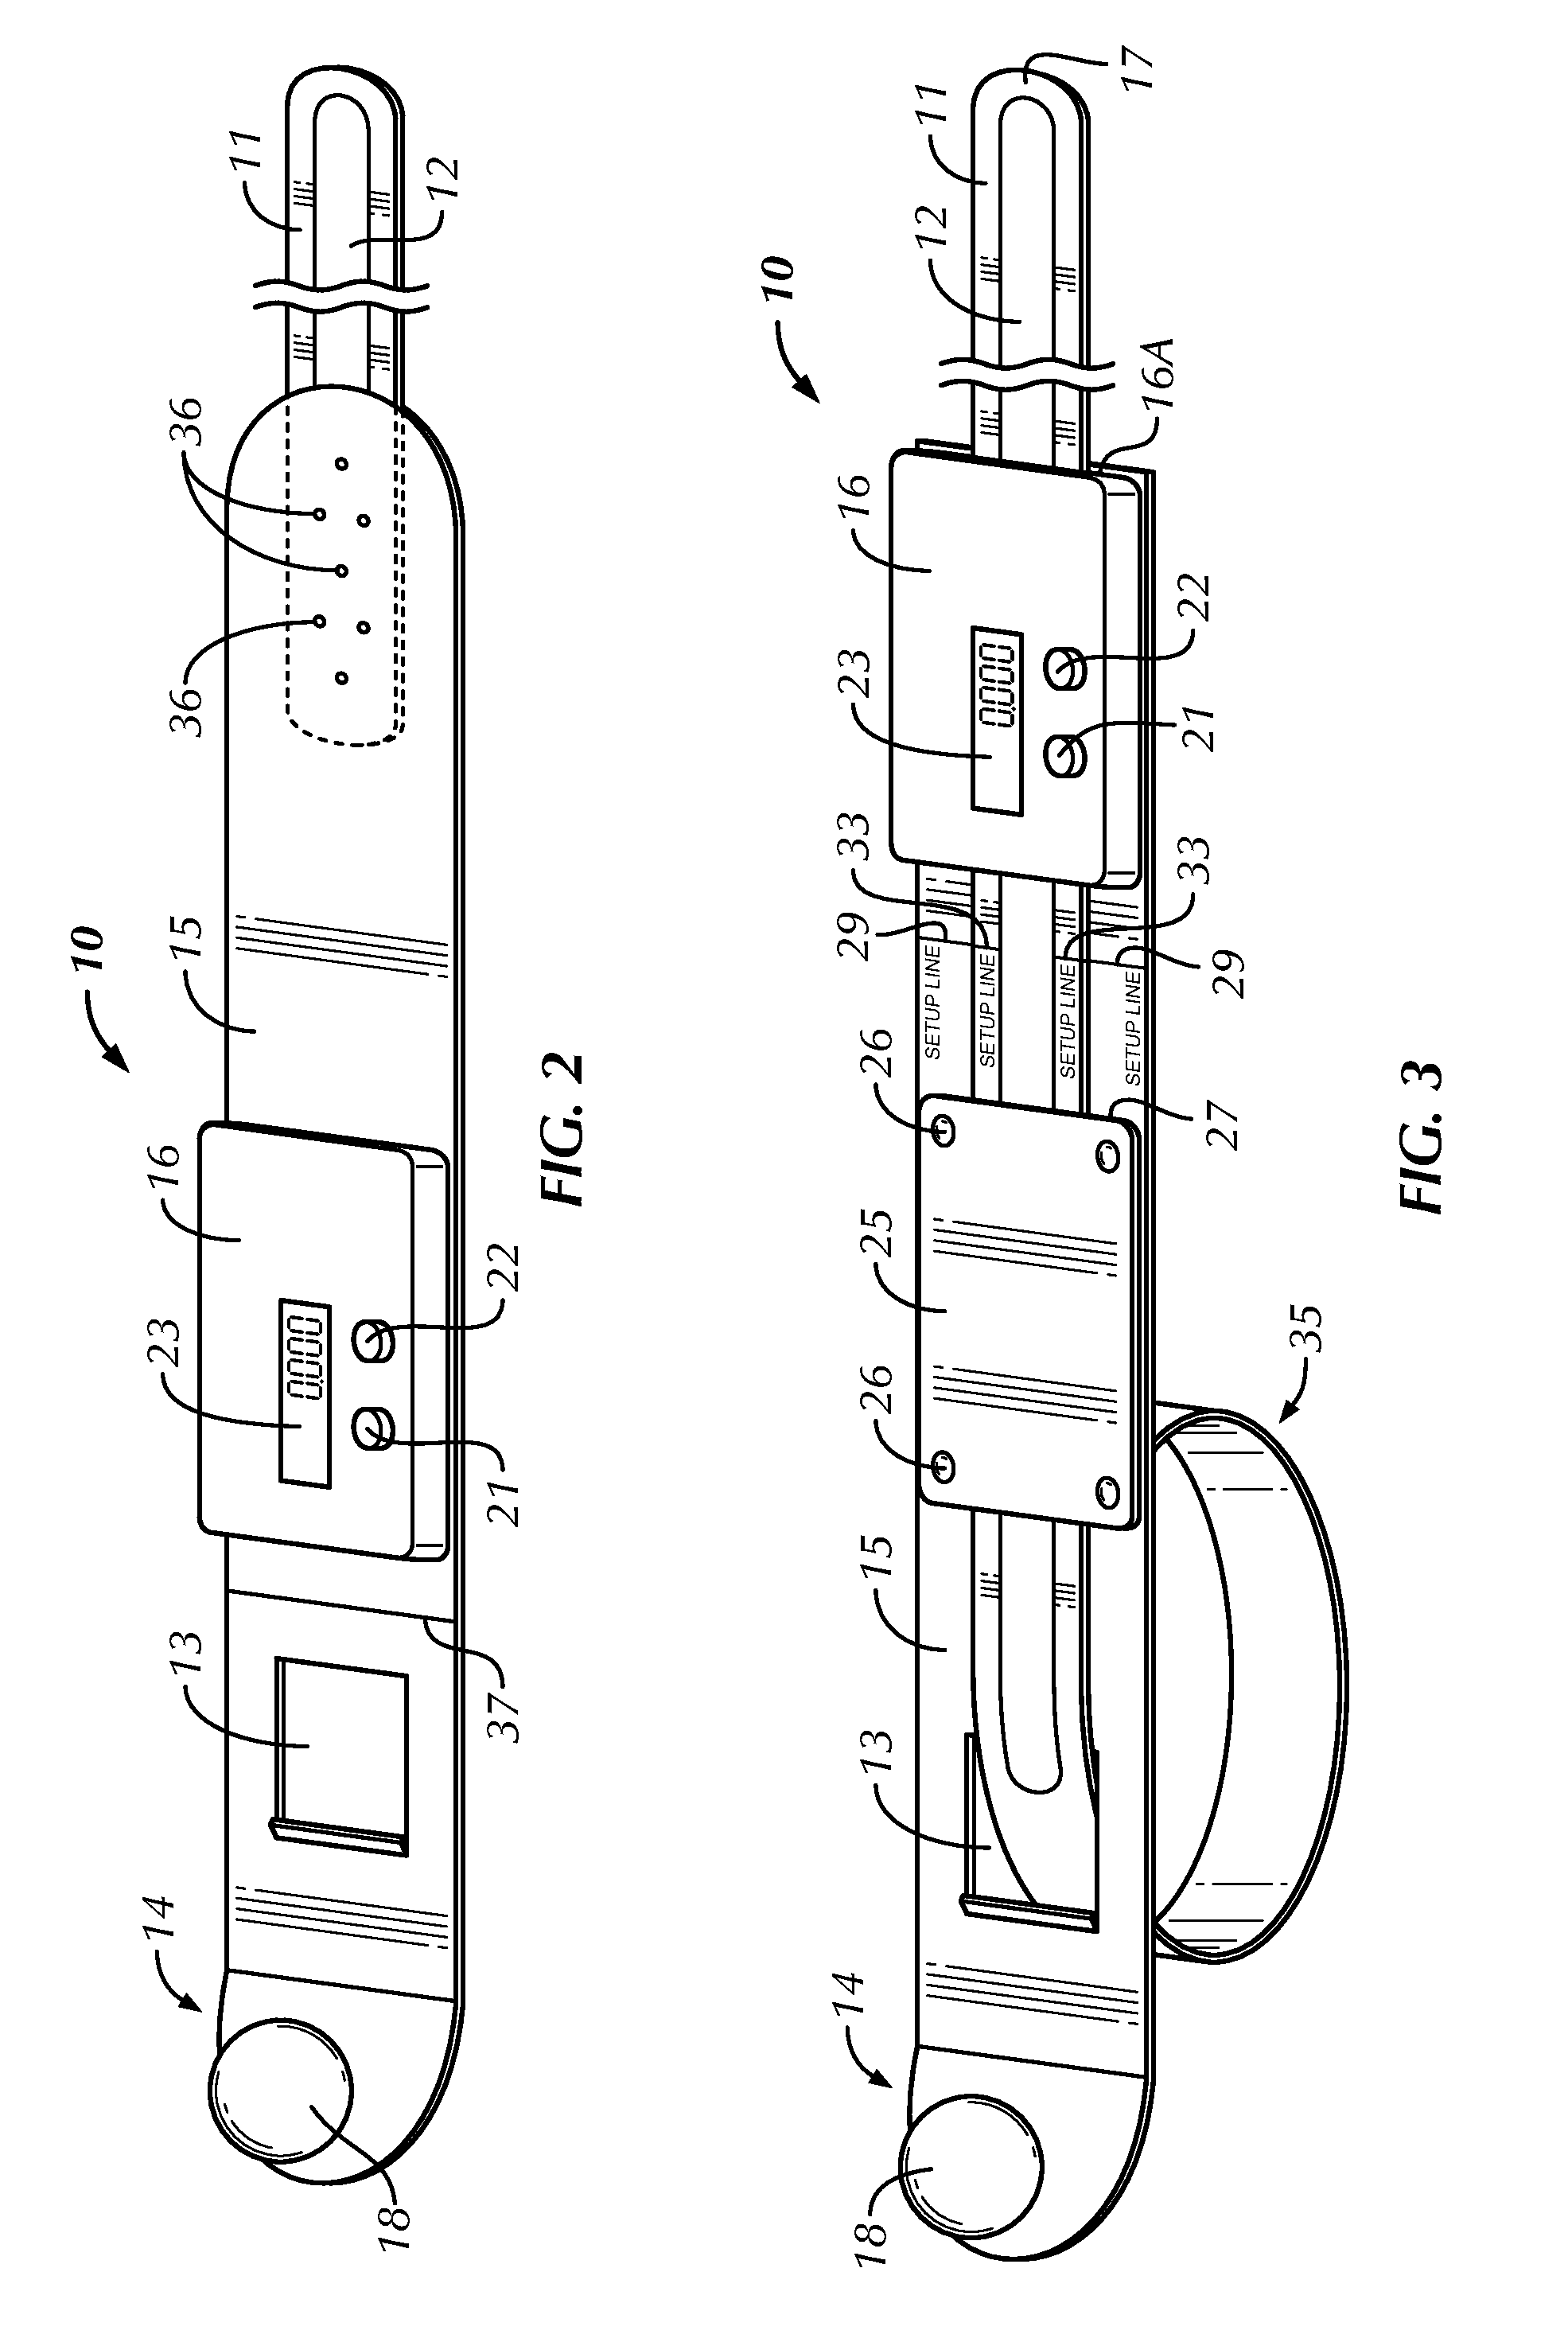 Optical readout device to provide visual information